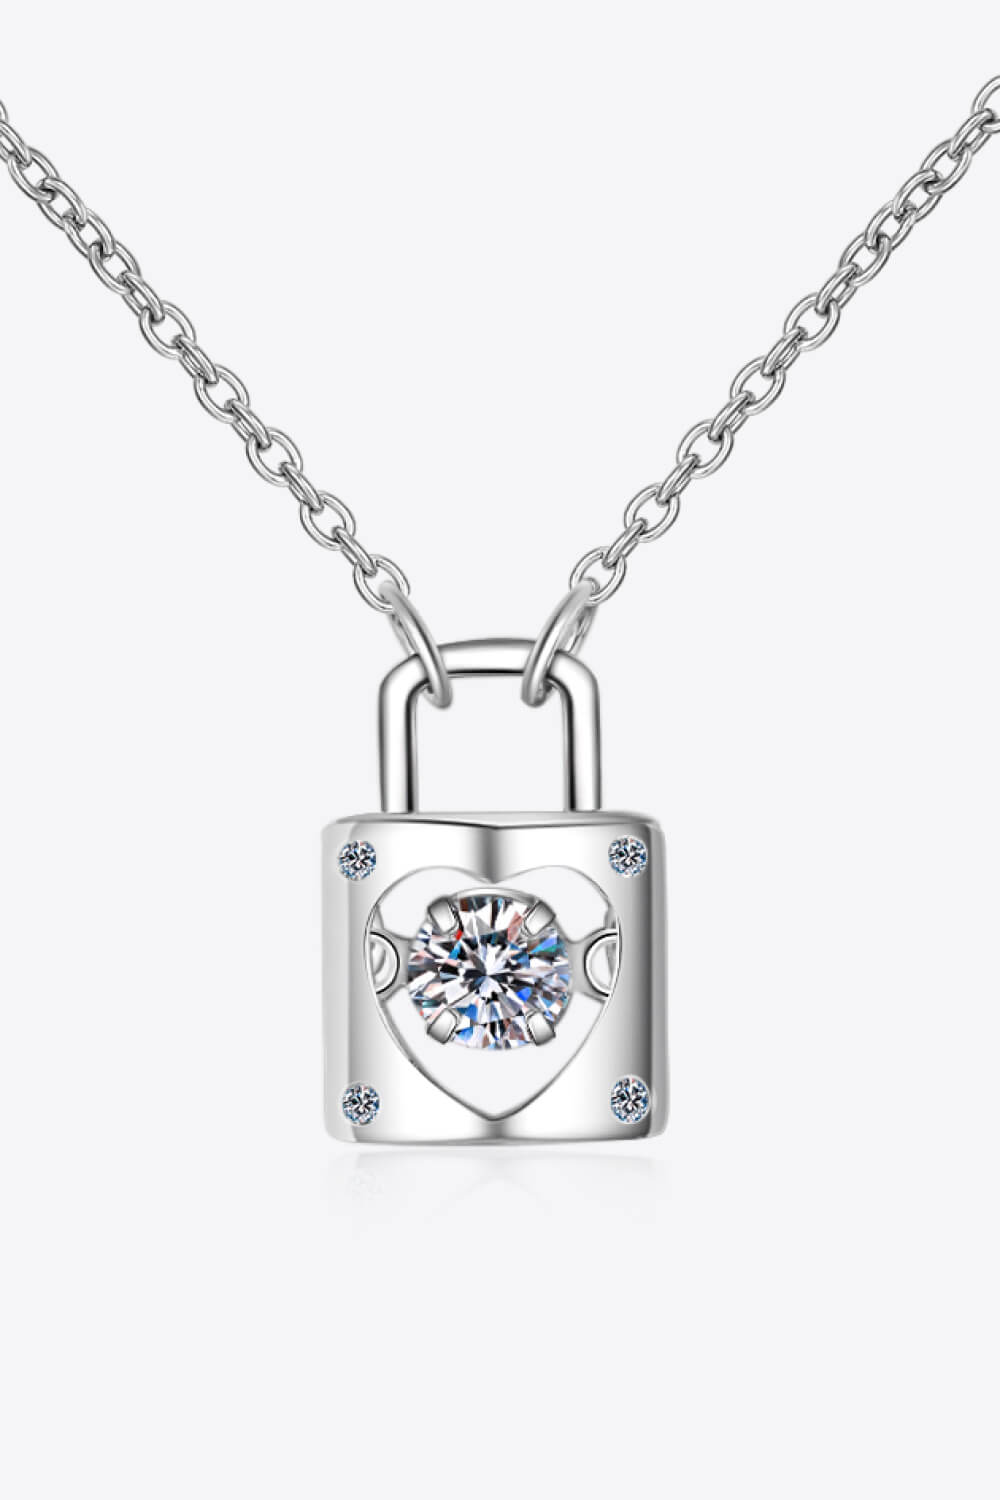 "Eternal Love - Mesmerizing Moissanite Pendant Necklace - A Timeless Celebration of Your Affection" - Guy Christopher